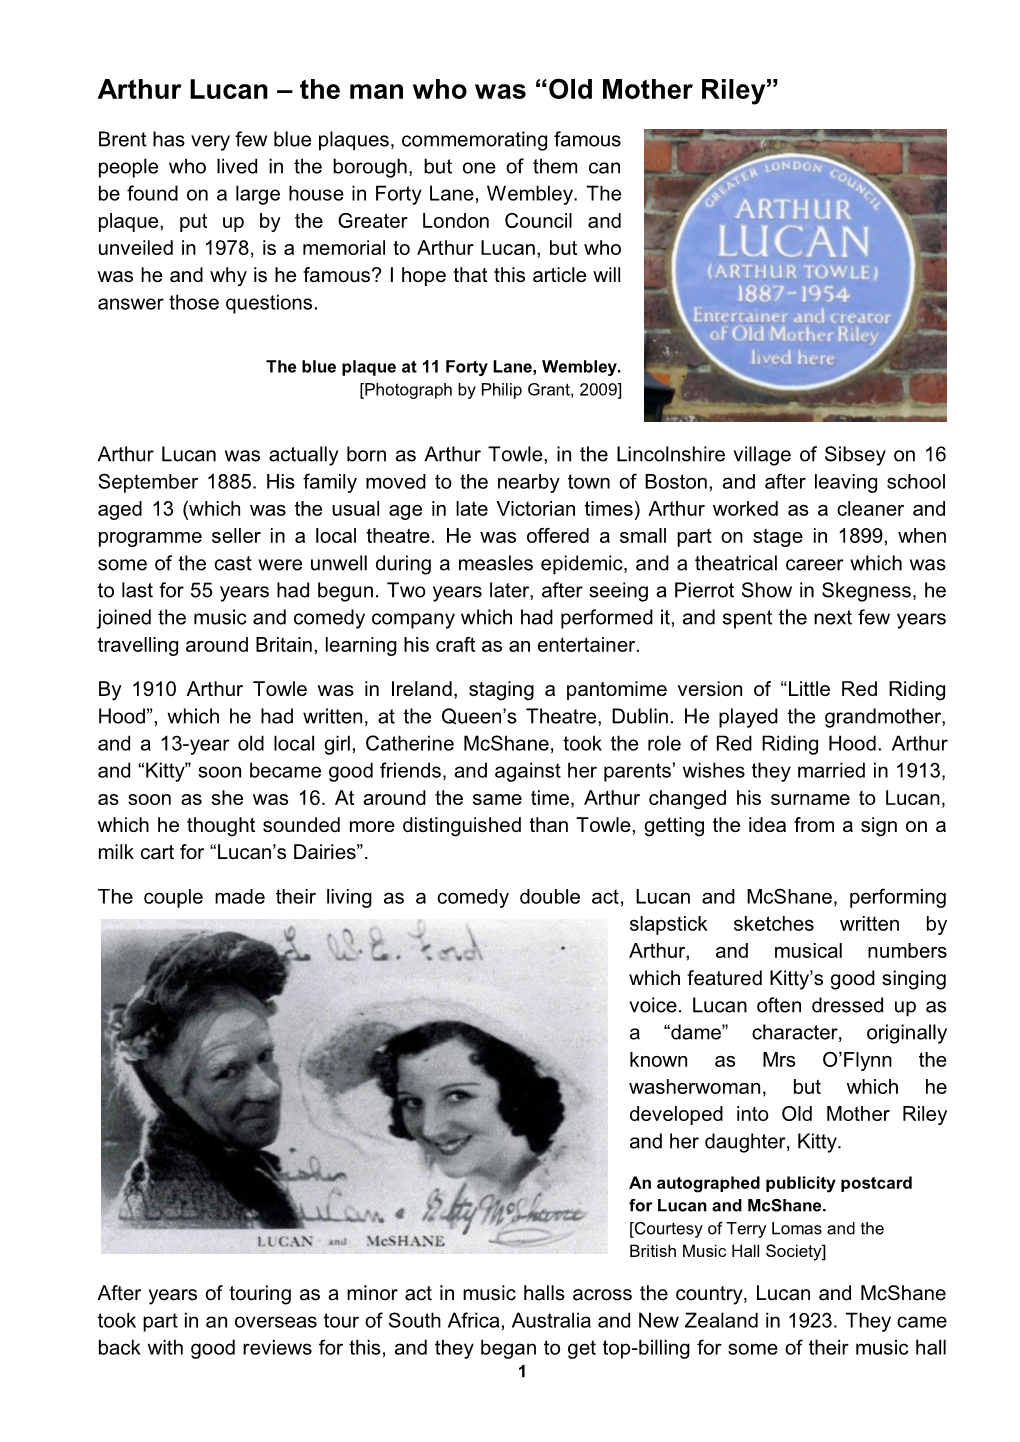 Arthur Lucan – the Man Who Was “Old Mother Riley”